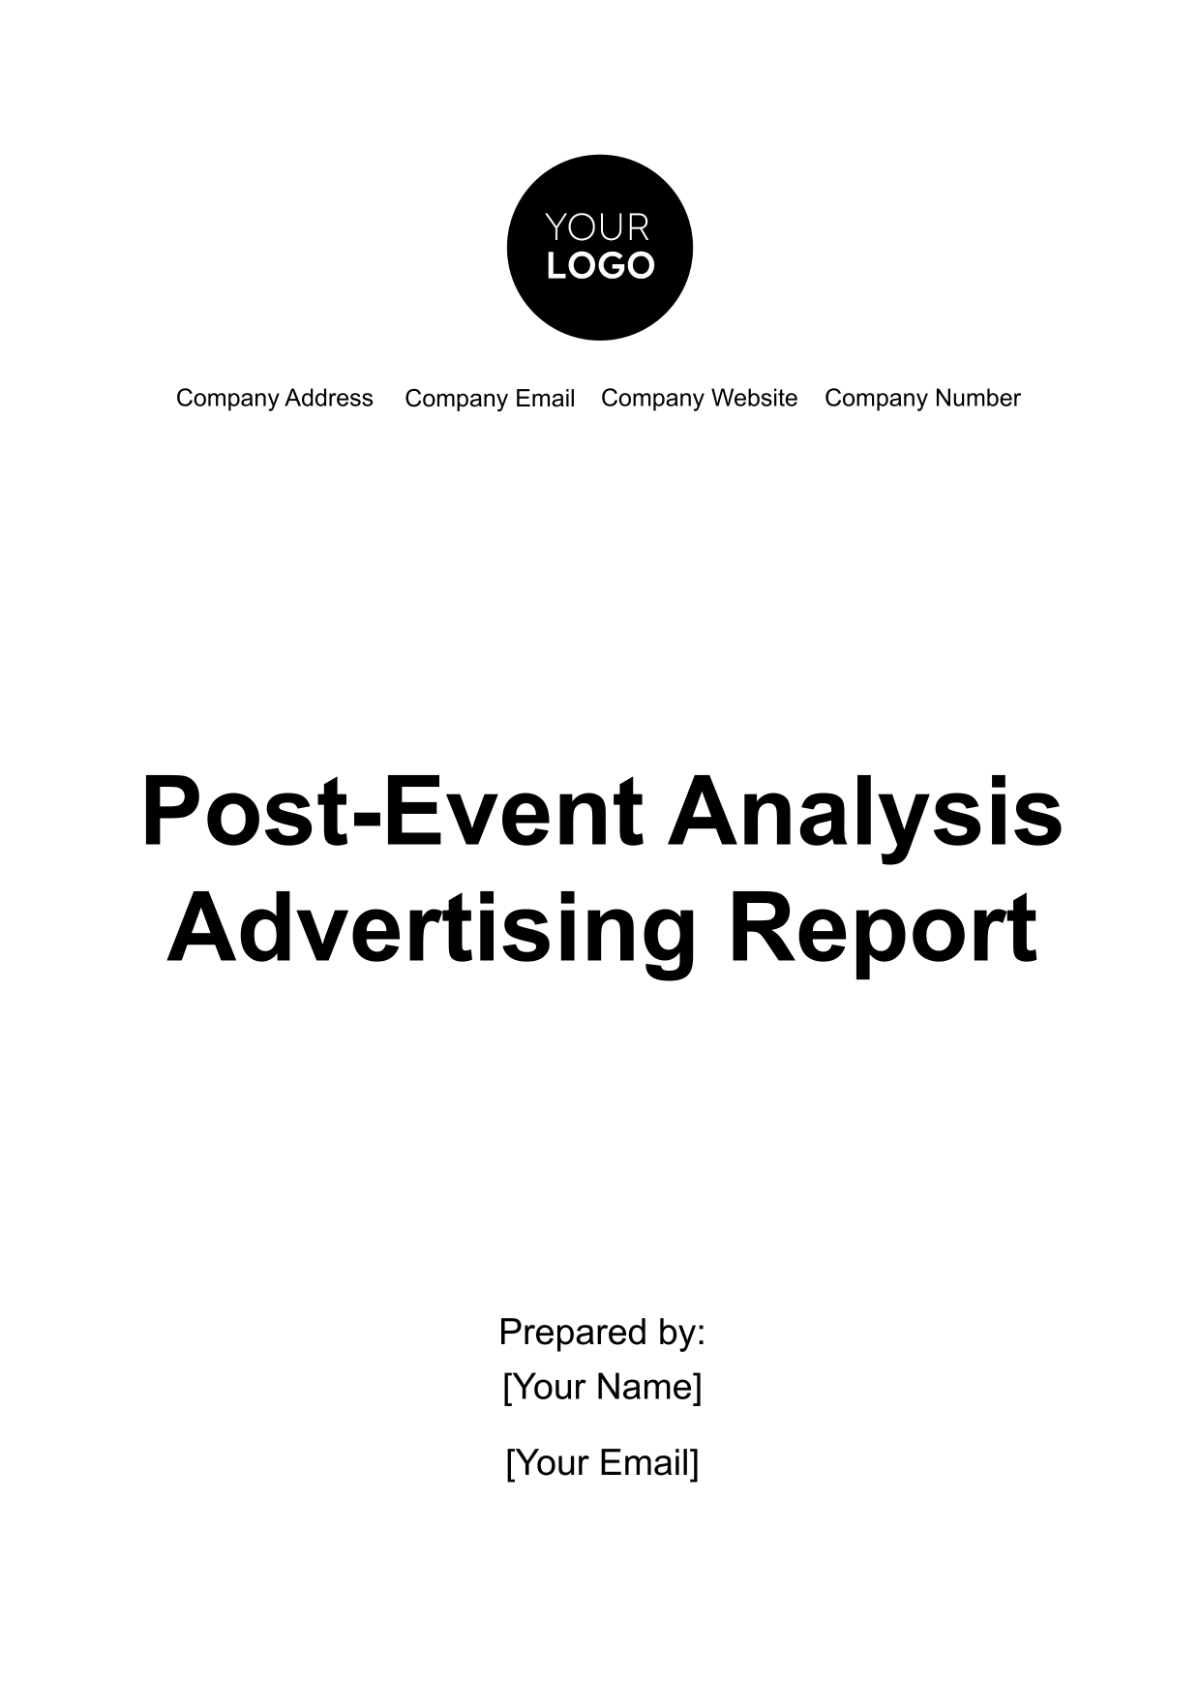 Post-Event Analysis Advertising Report Template